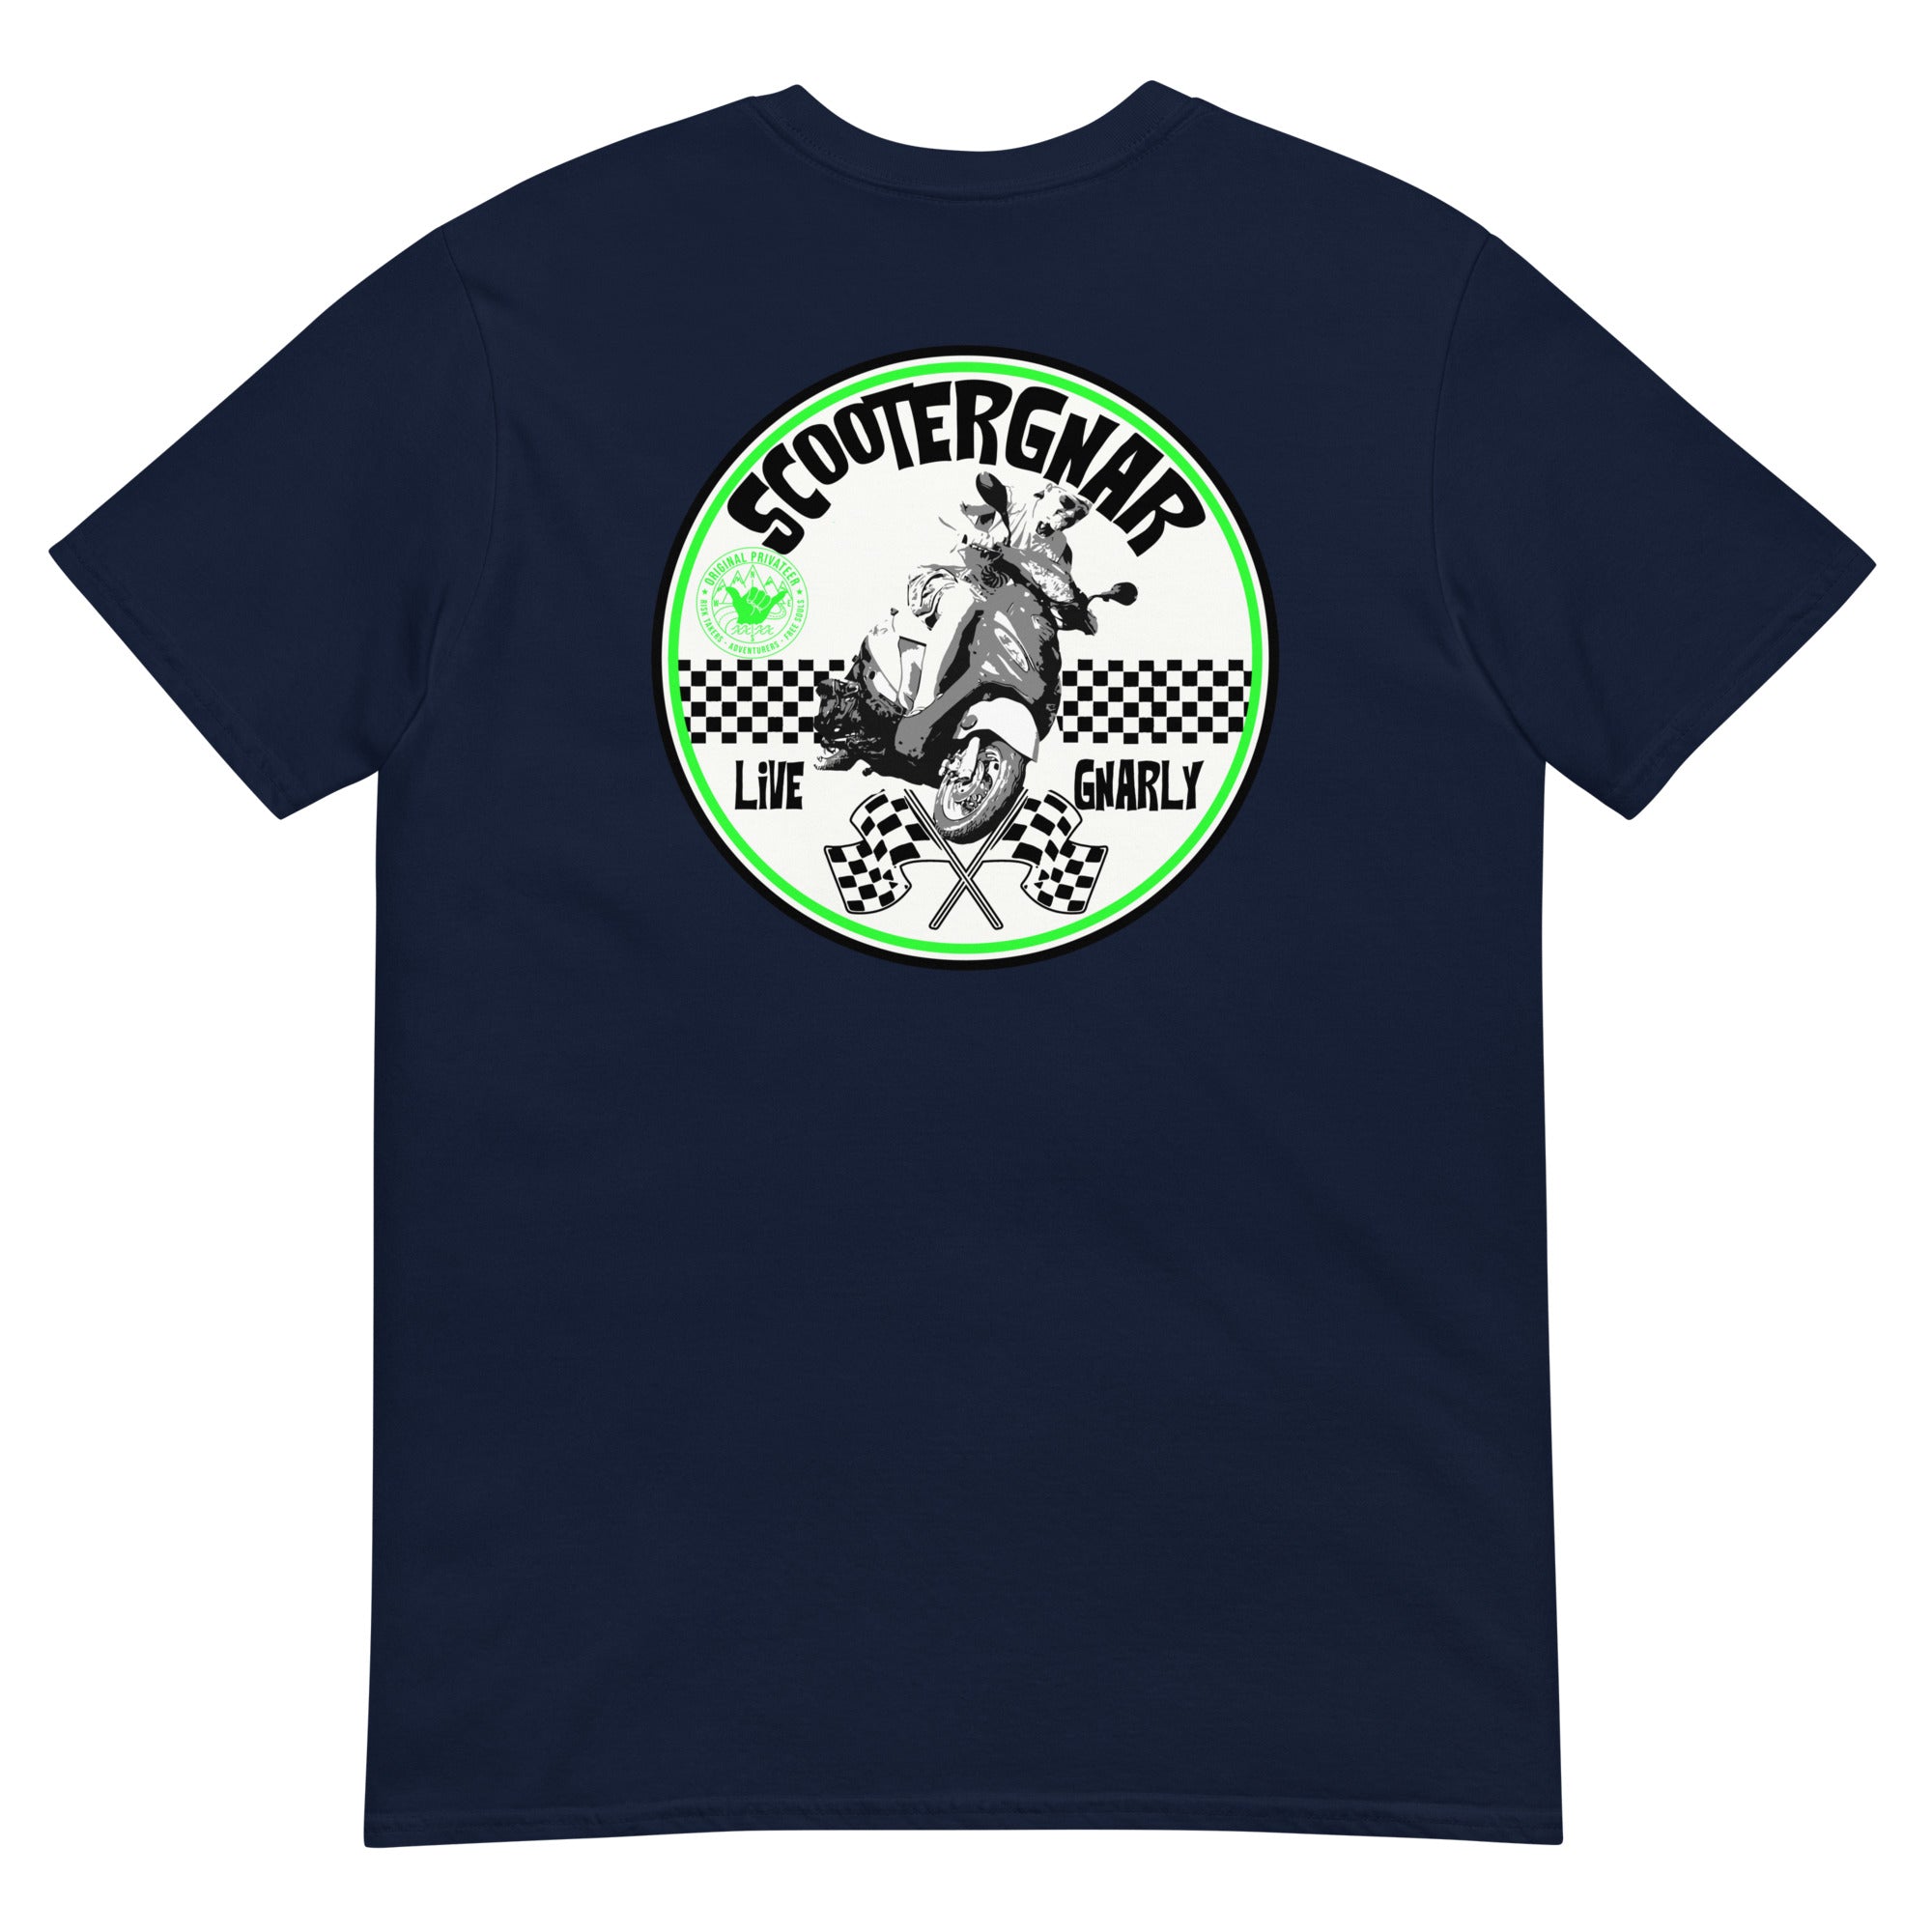 Scooter & Vespa Riders Live Gnarly Unisex T-Shirt